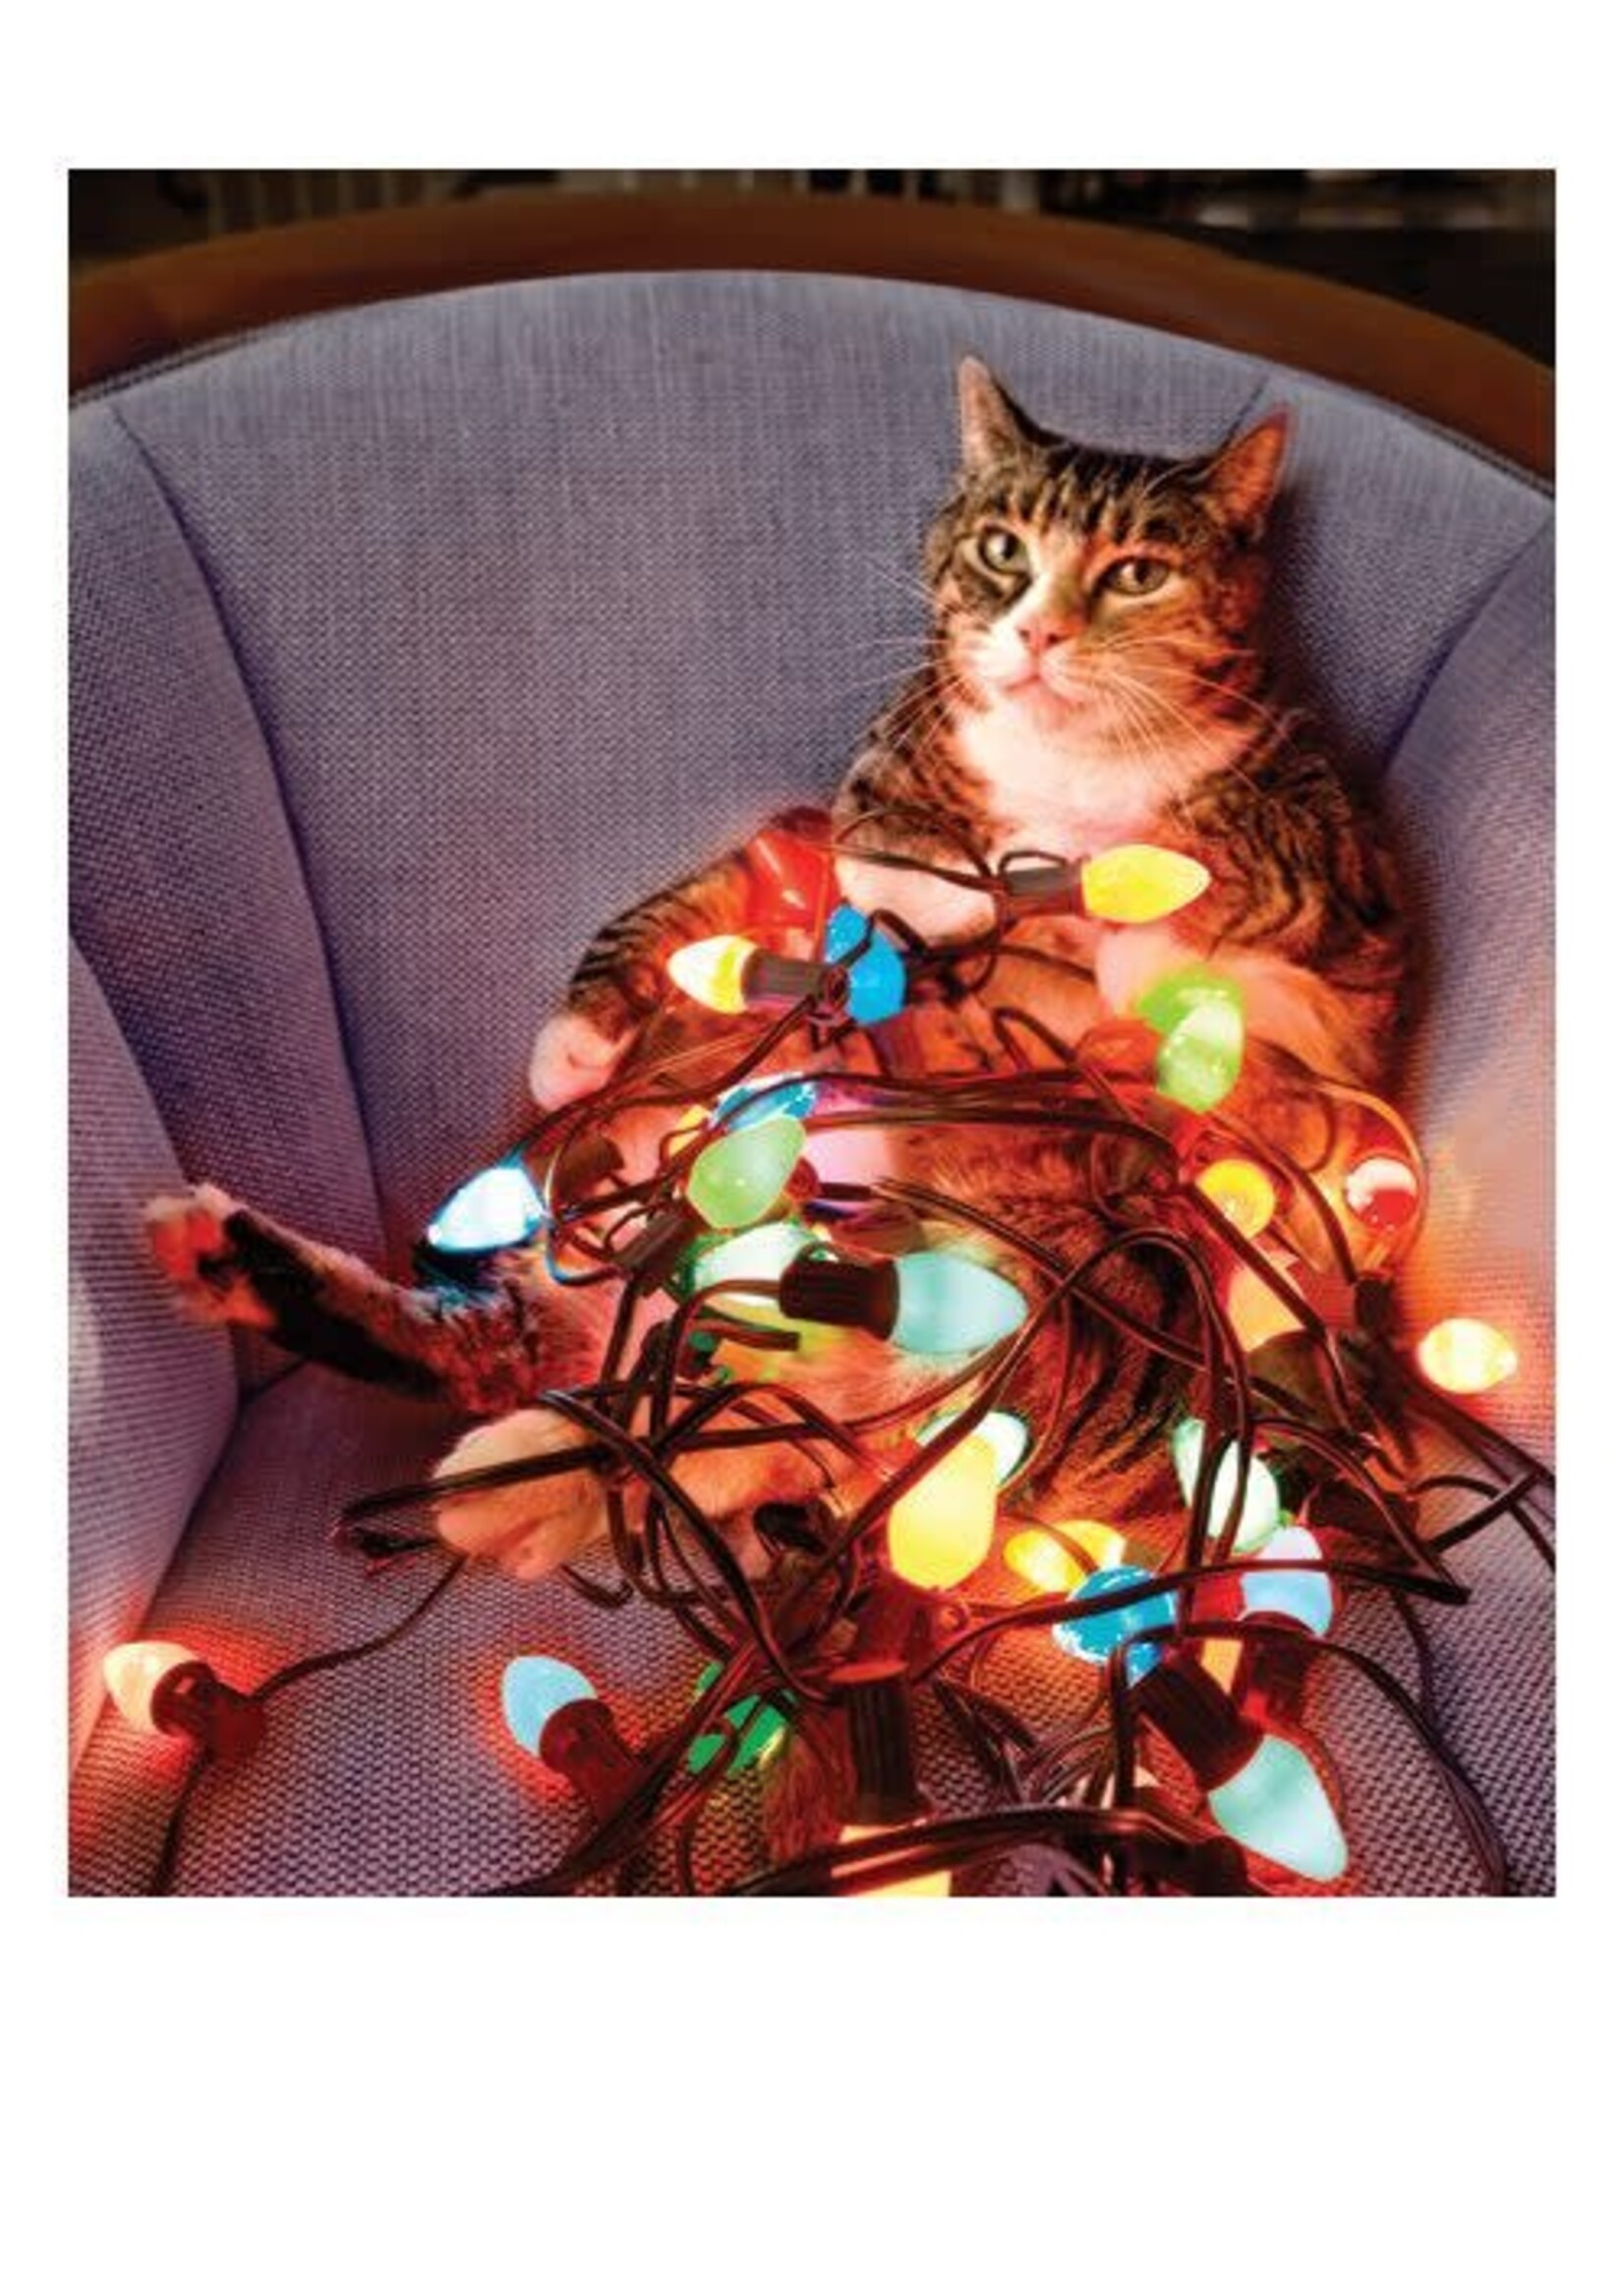 Bx Xmas Cat Wrapped In Lights